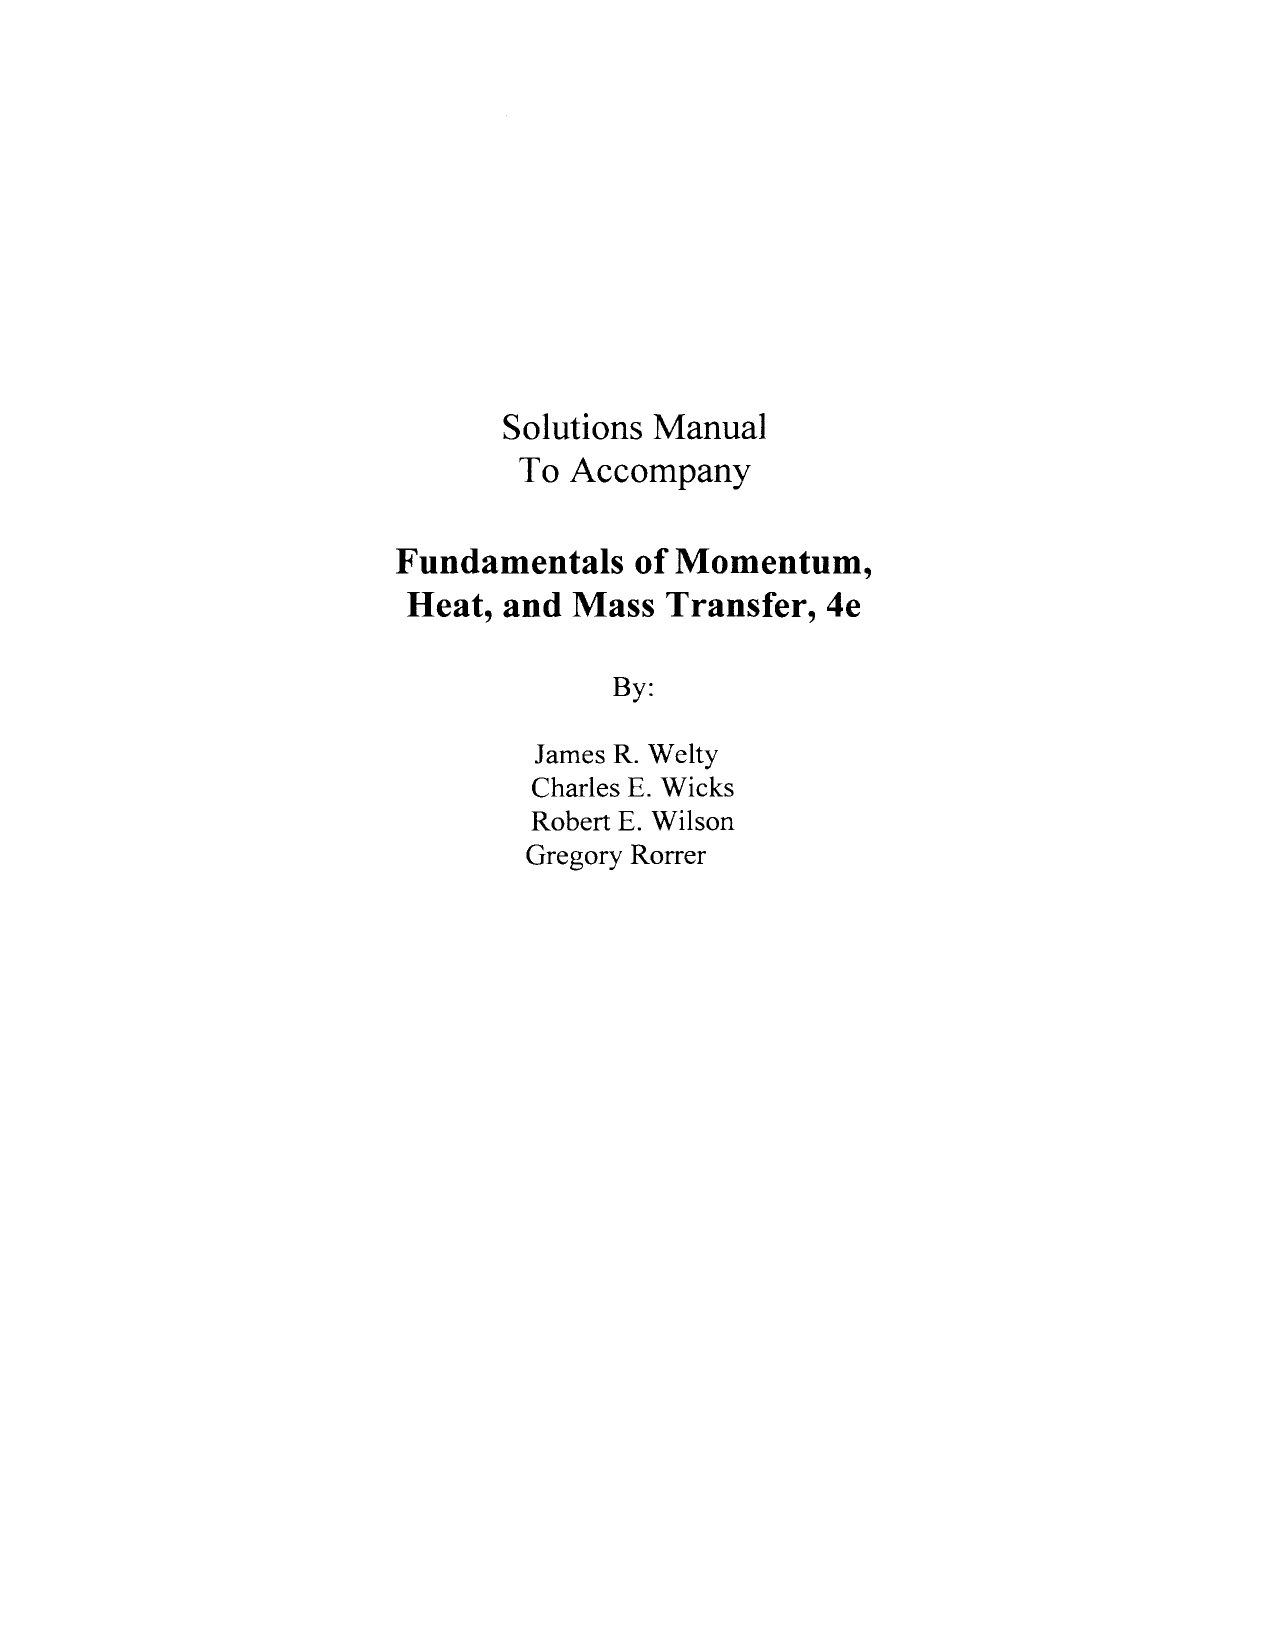 Download Free Fundamentals of Momentum Heat and Mass Transfer 4th & 5th edition Solution Manual & answers by Welty eBook pdf James Welty, Charles E. Wicks, Gregory L. Rorrer,